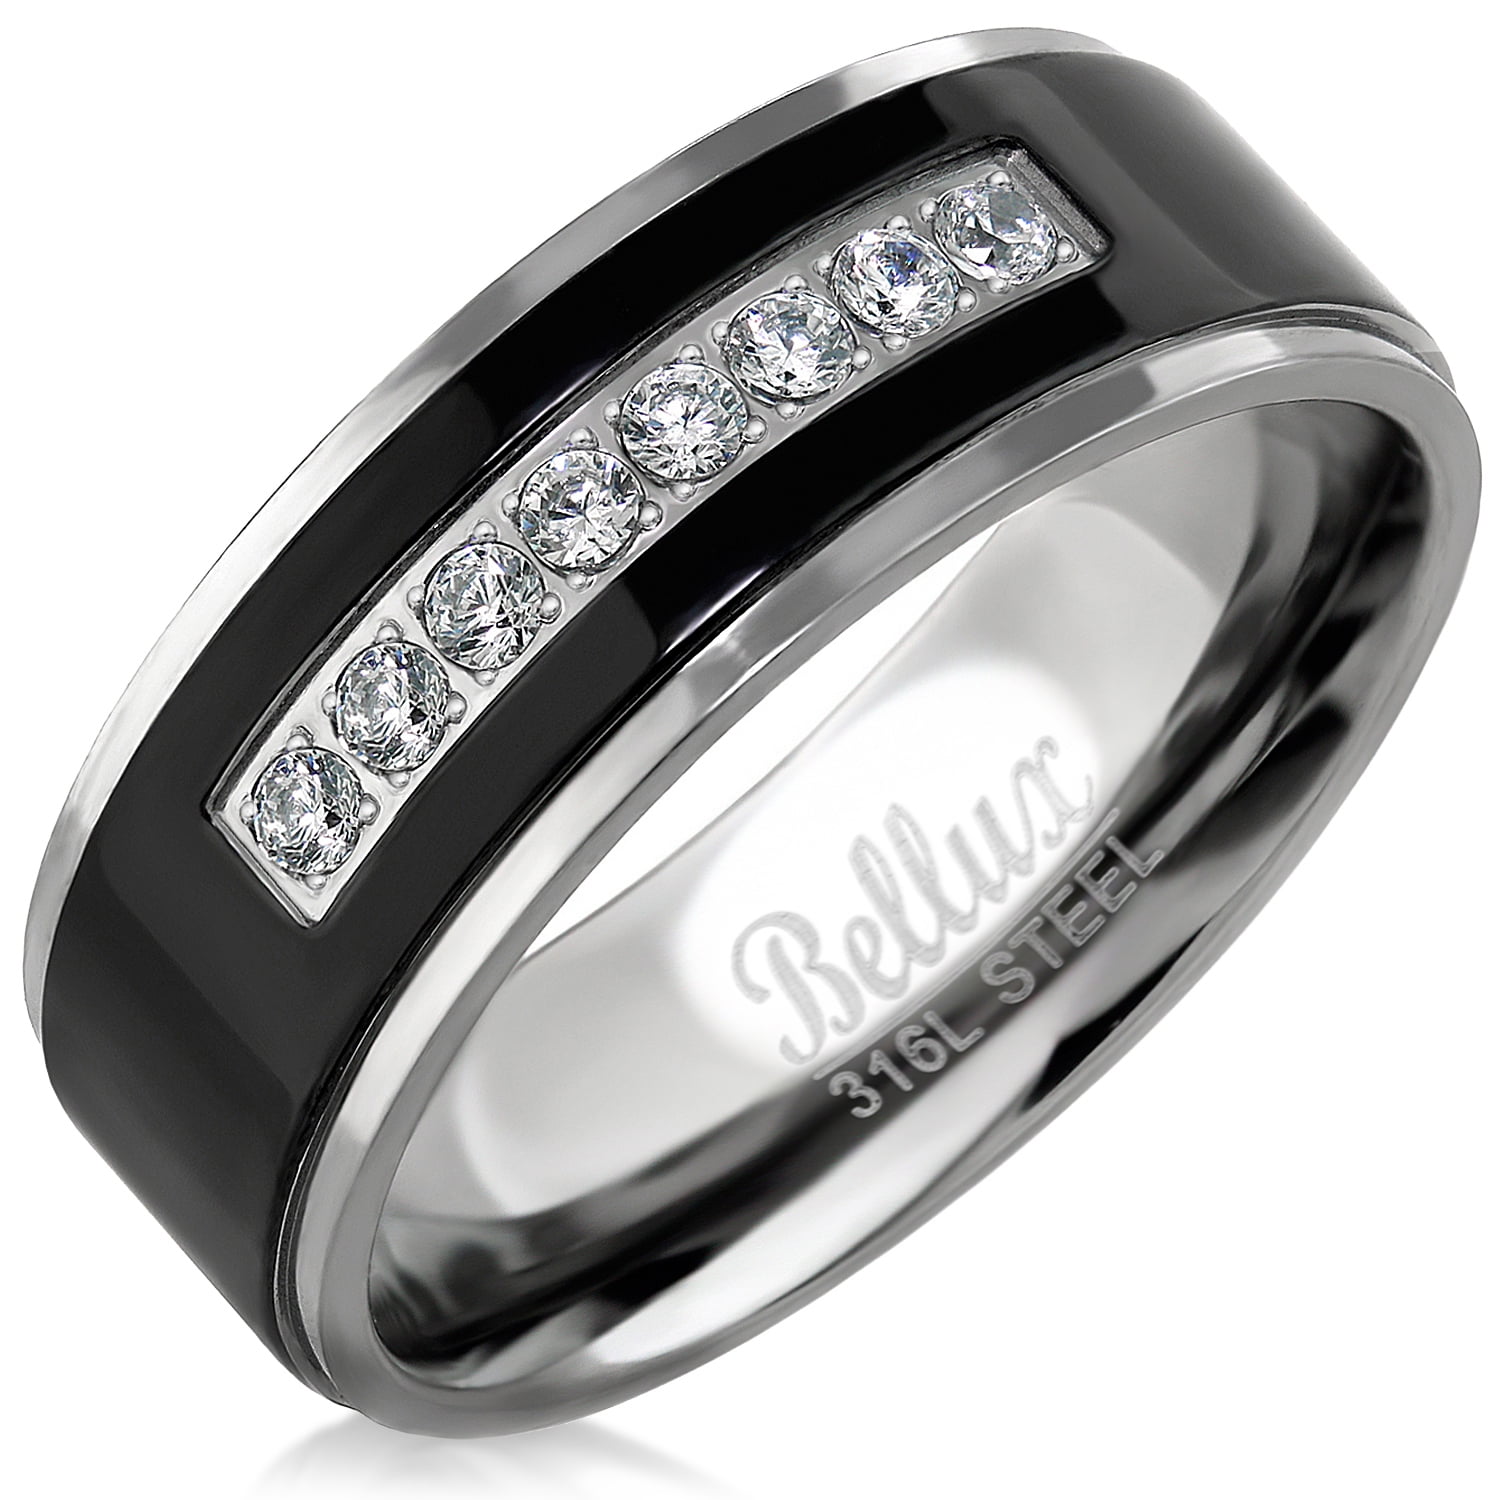 Stainless Steel Wedding Rings For Him